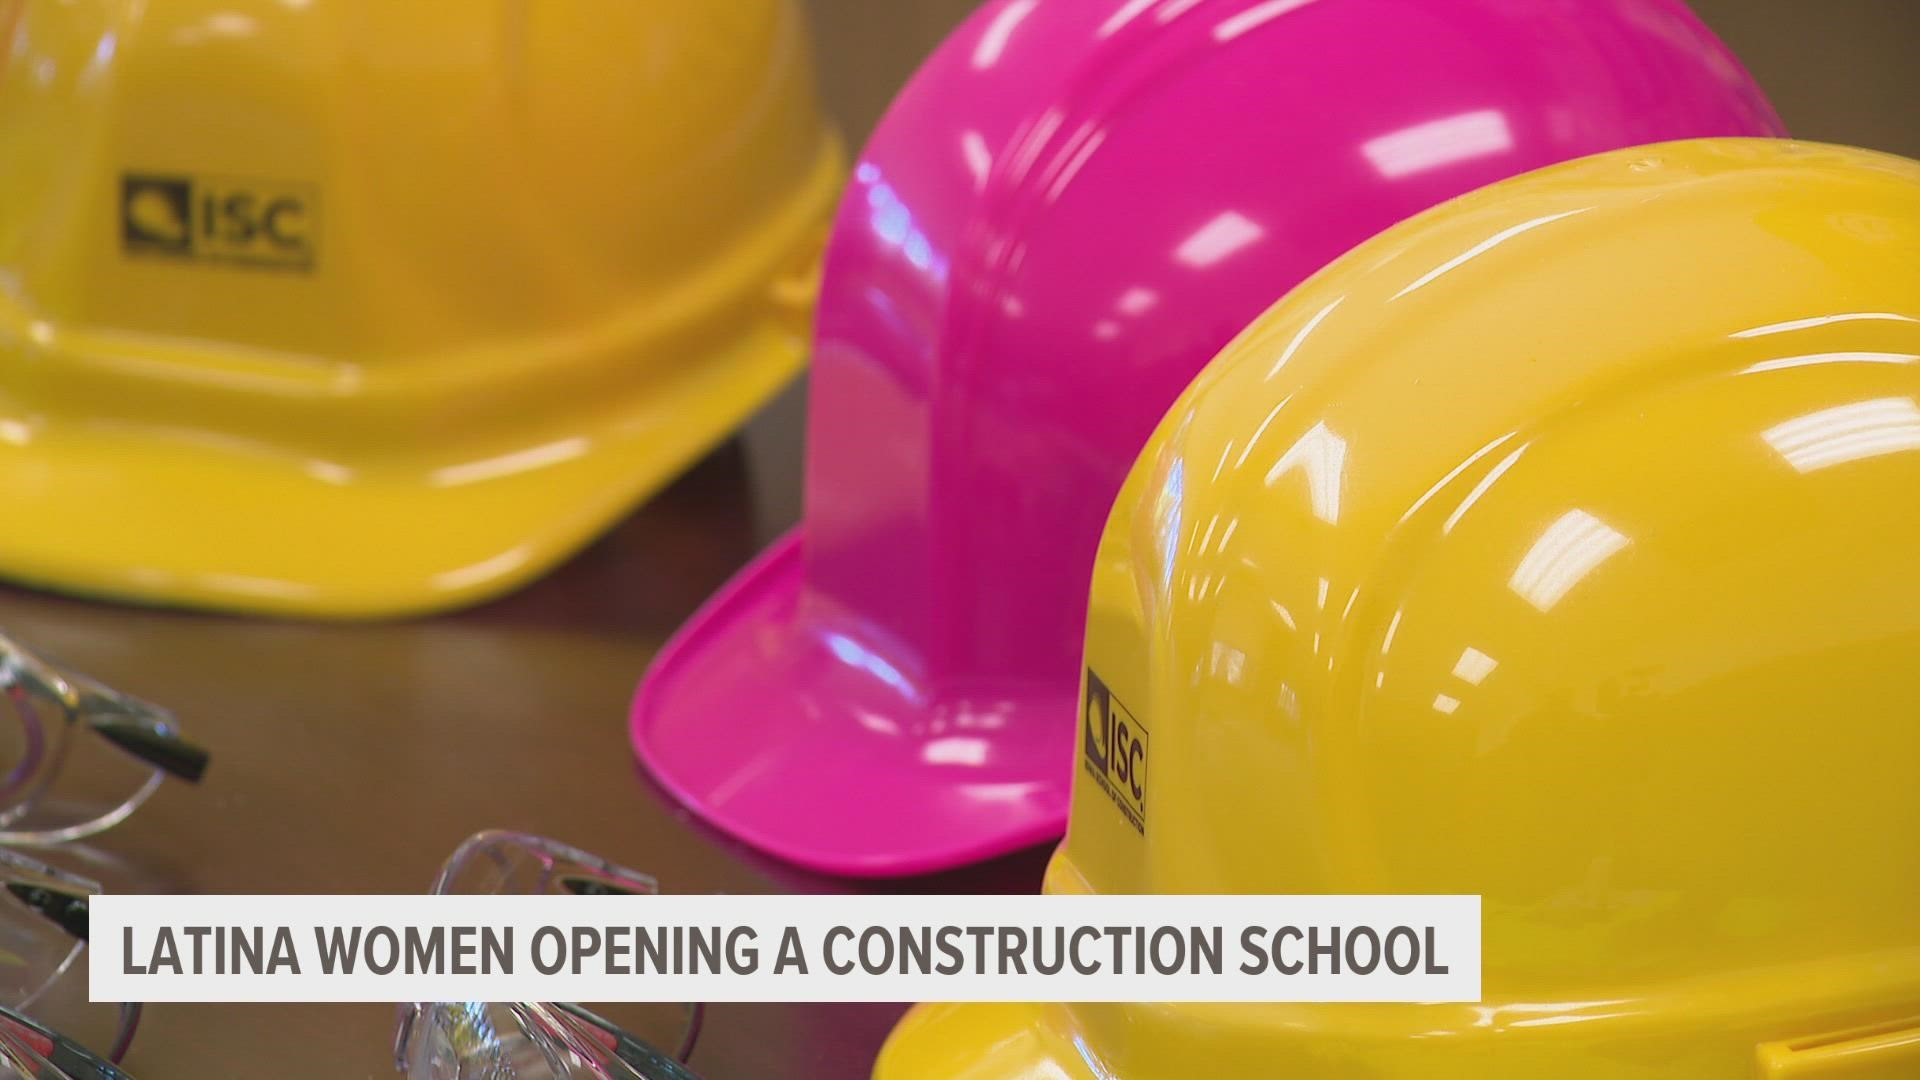 50 students are a part of the pilot of the school, set to open in just a few months. Classes start in February.